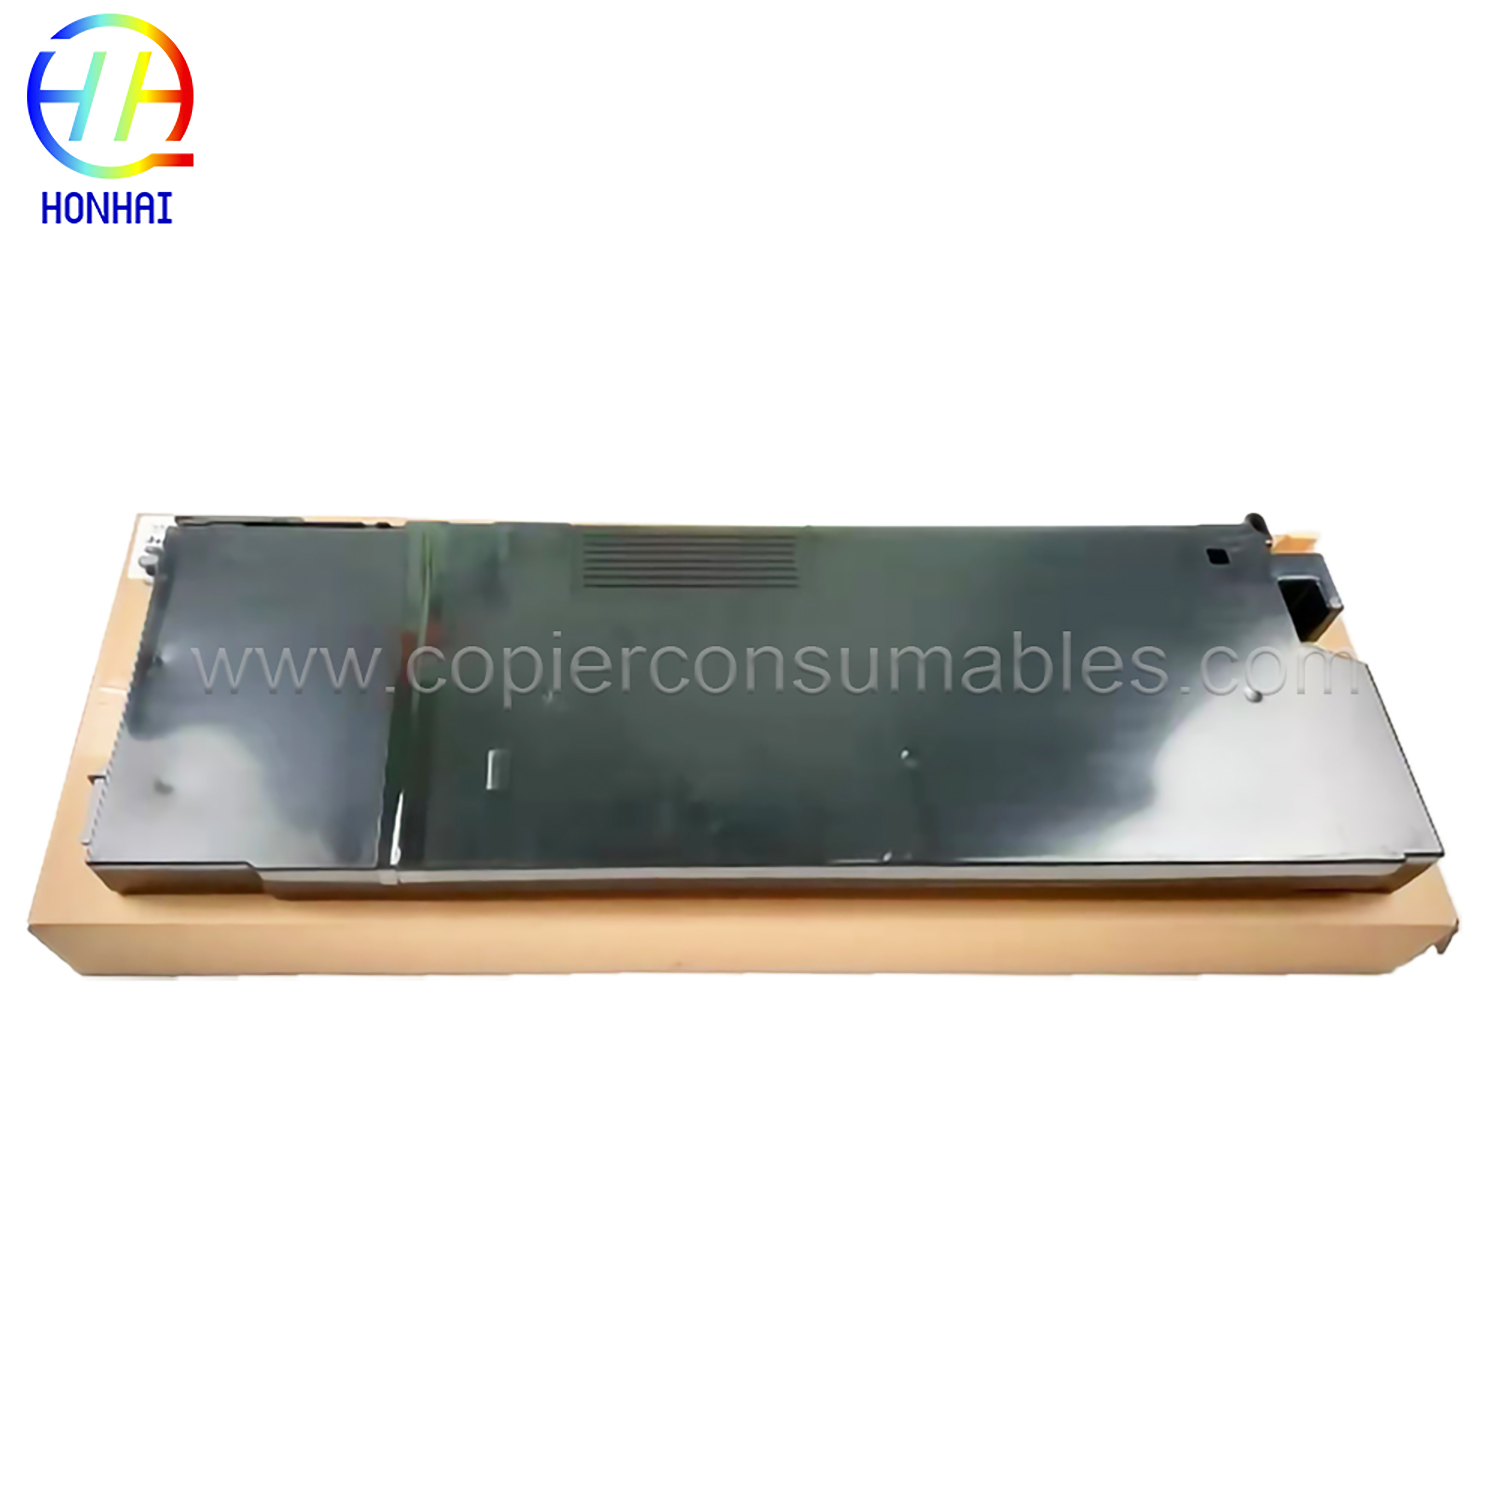 Waste Toner Container Compatible for Xerox 4110 4127 4590 4595 D110 D125 D136 D95 ED125 ED95A 008R13036